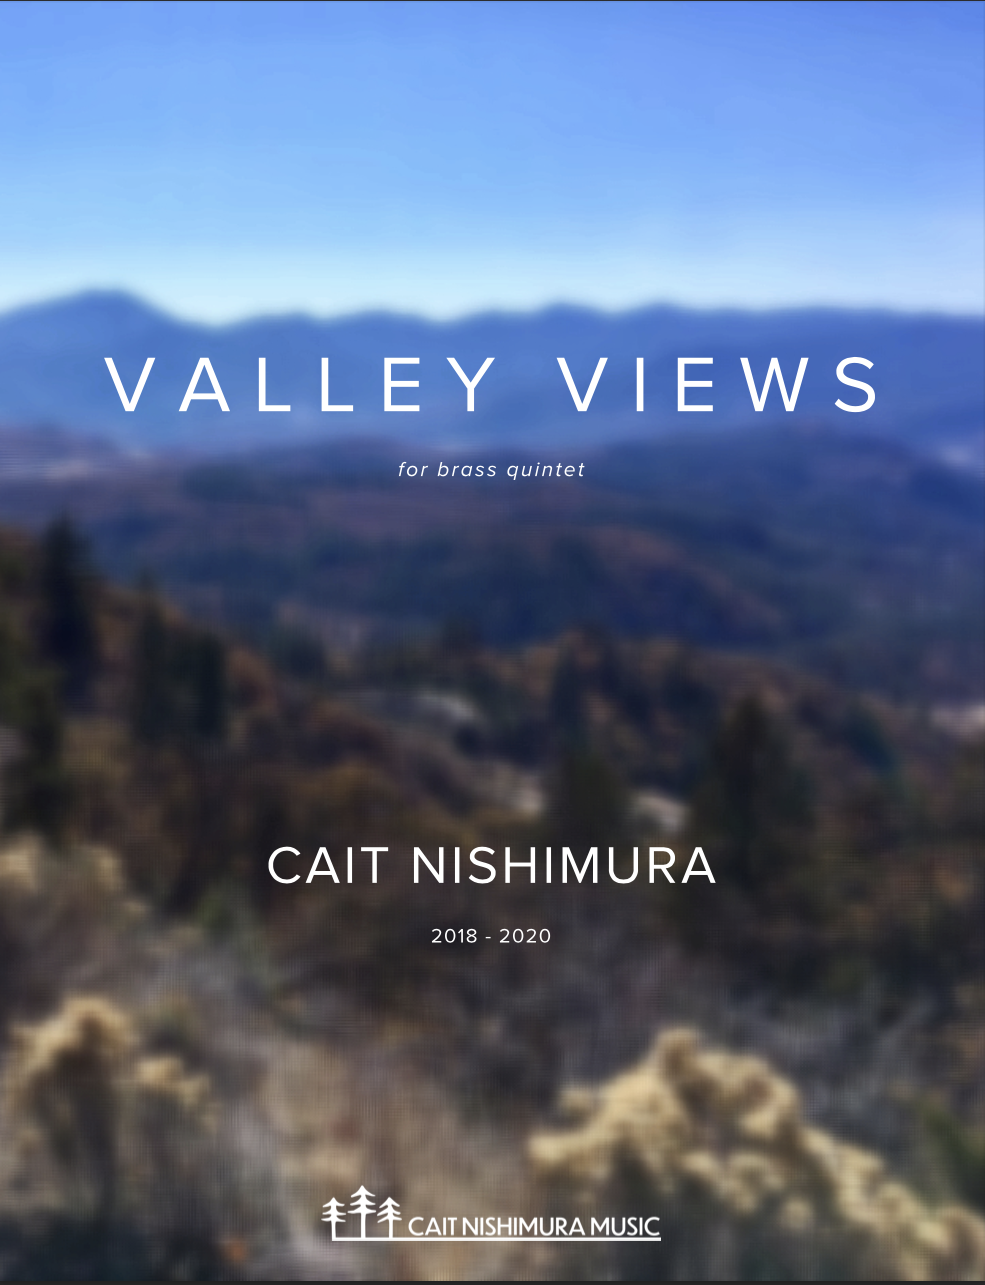 Valley Views by Cait Nishimura